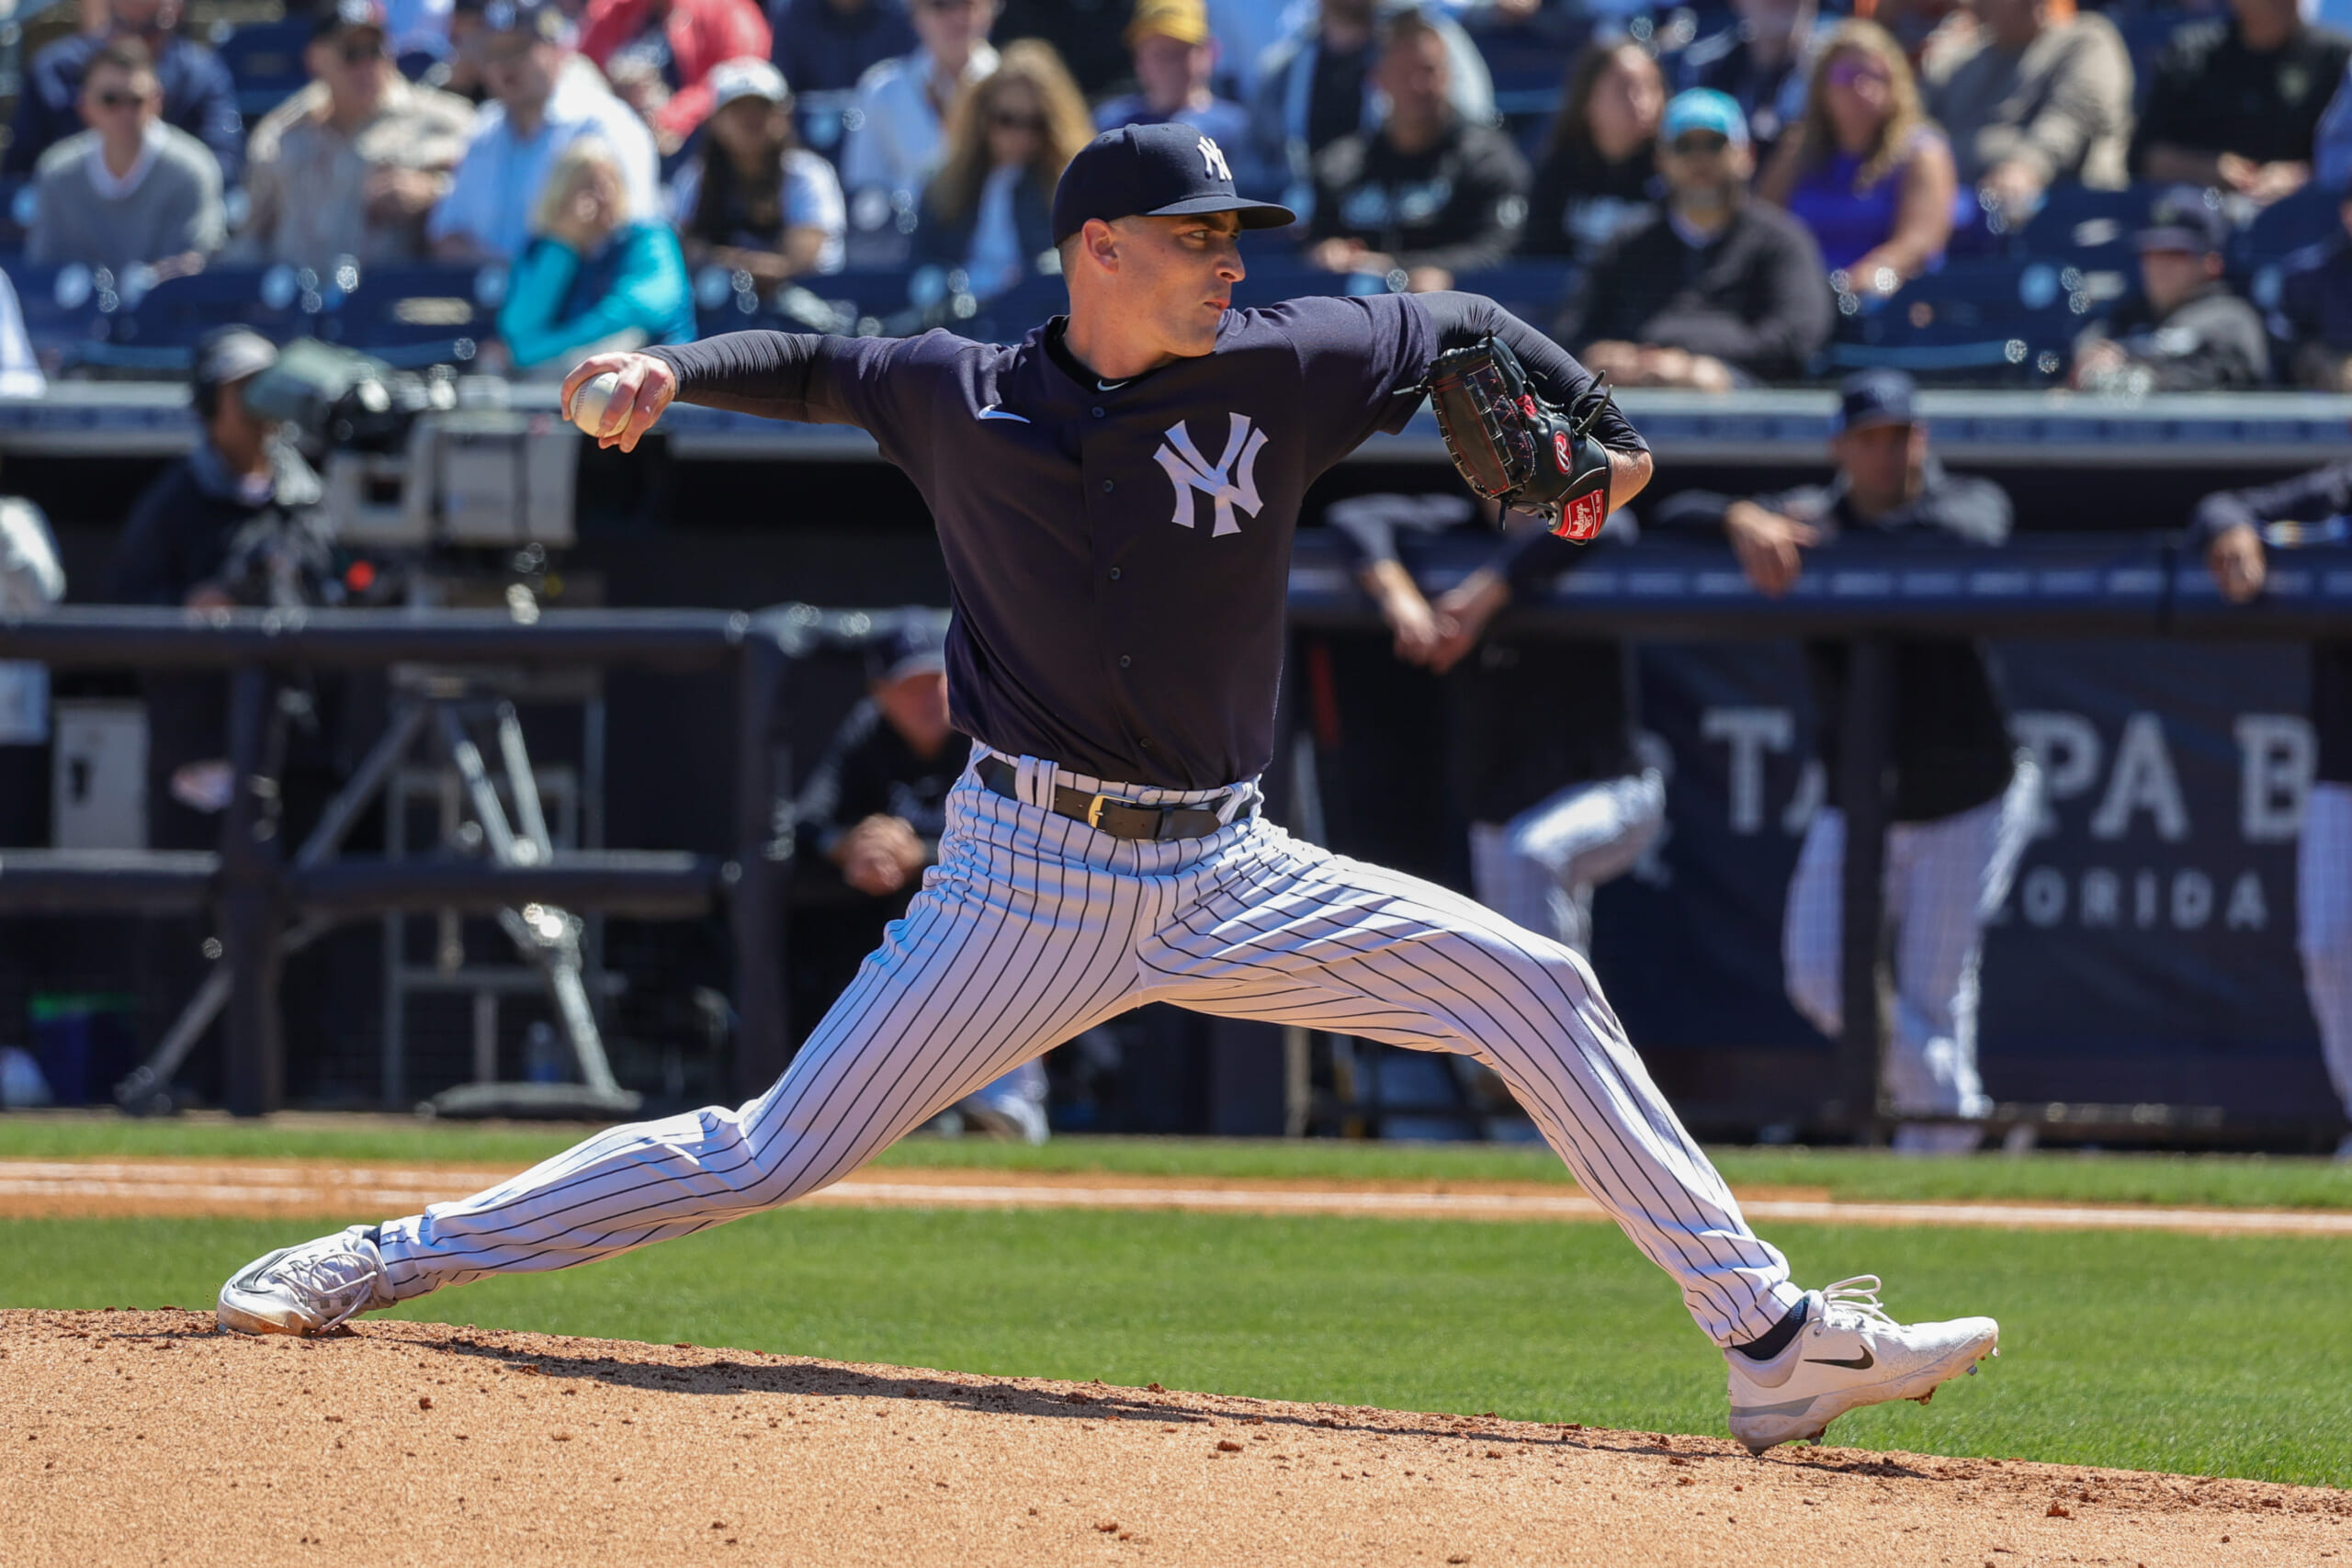 The Yankees have a budding star in the bullpen